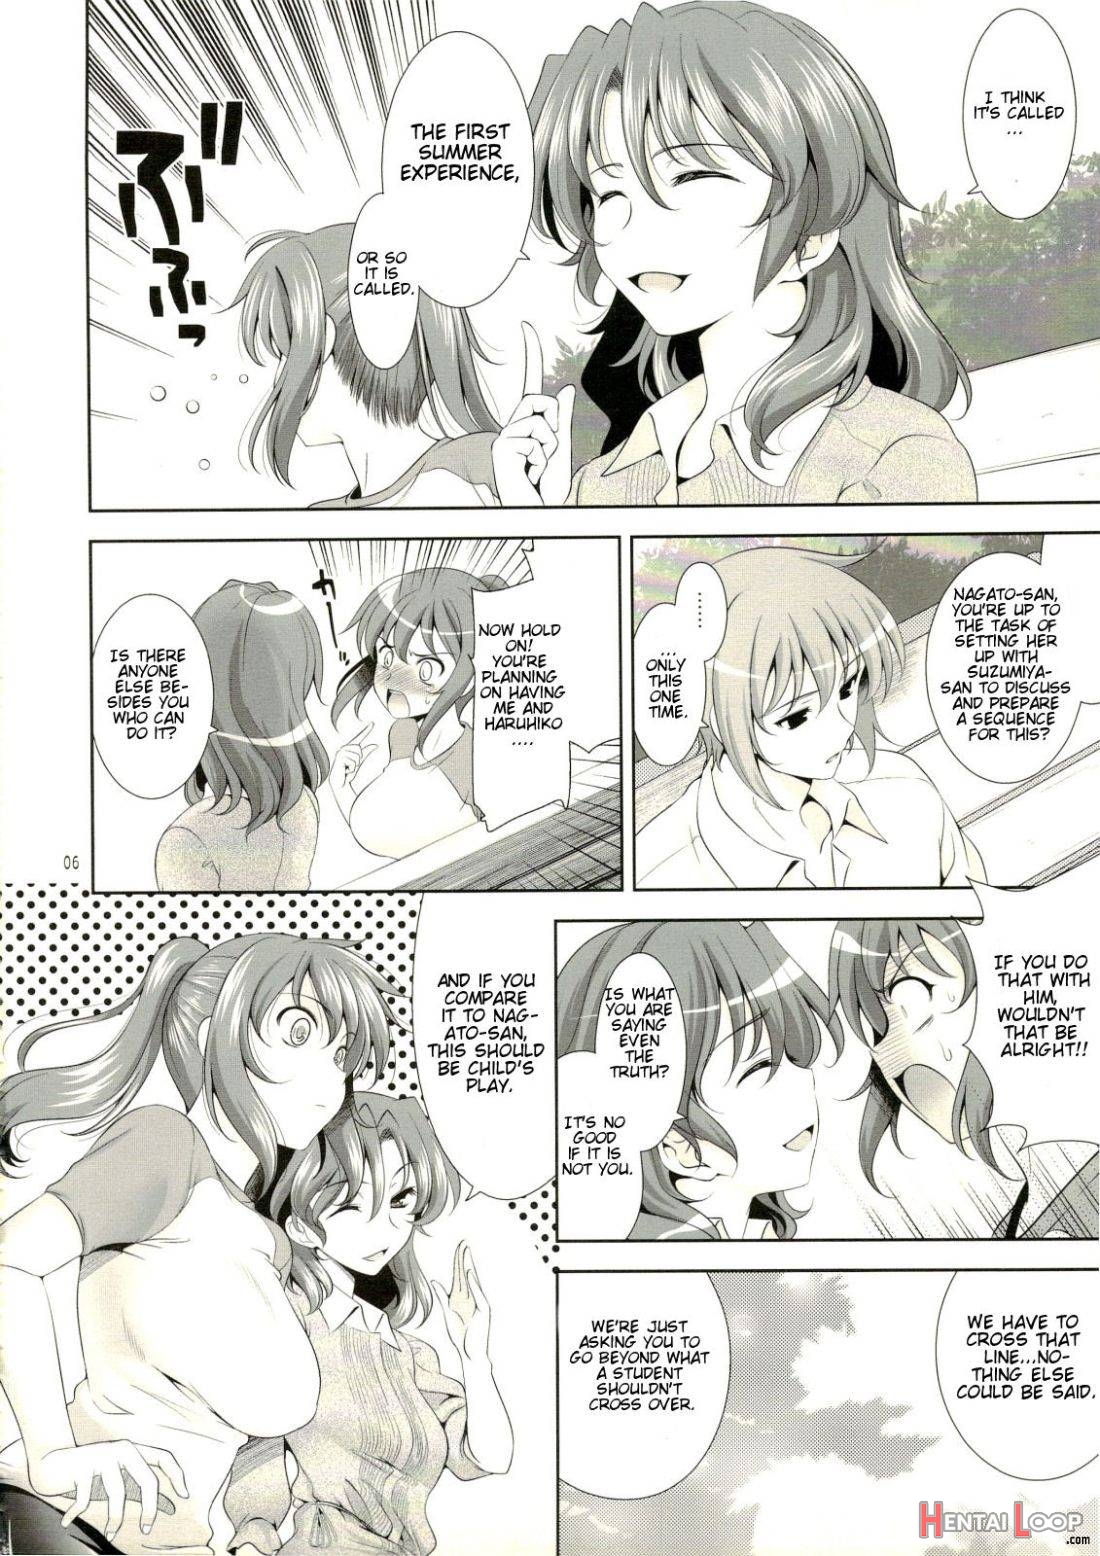 Manatsu no Yo no Yume no Mata Yume no Mata Yume page 3